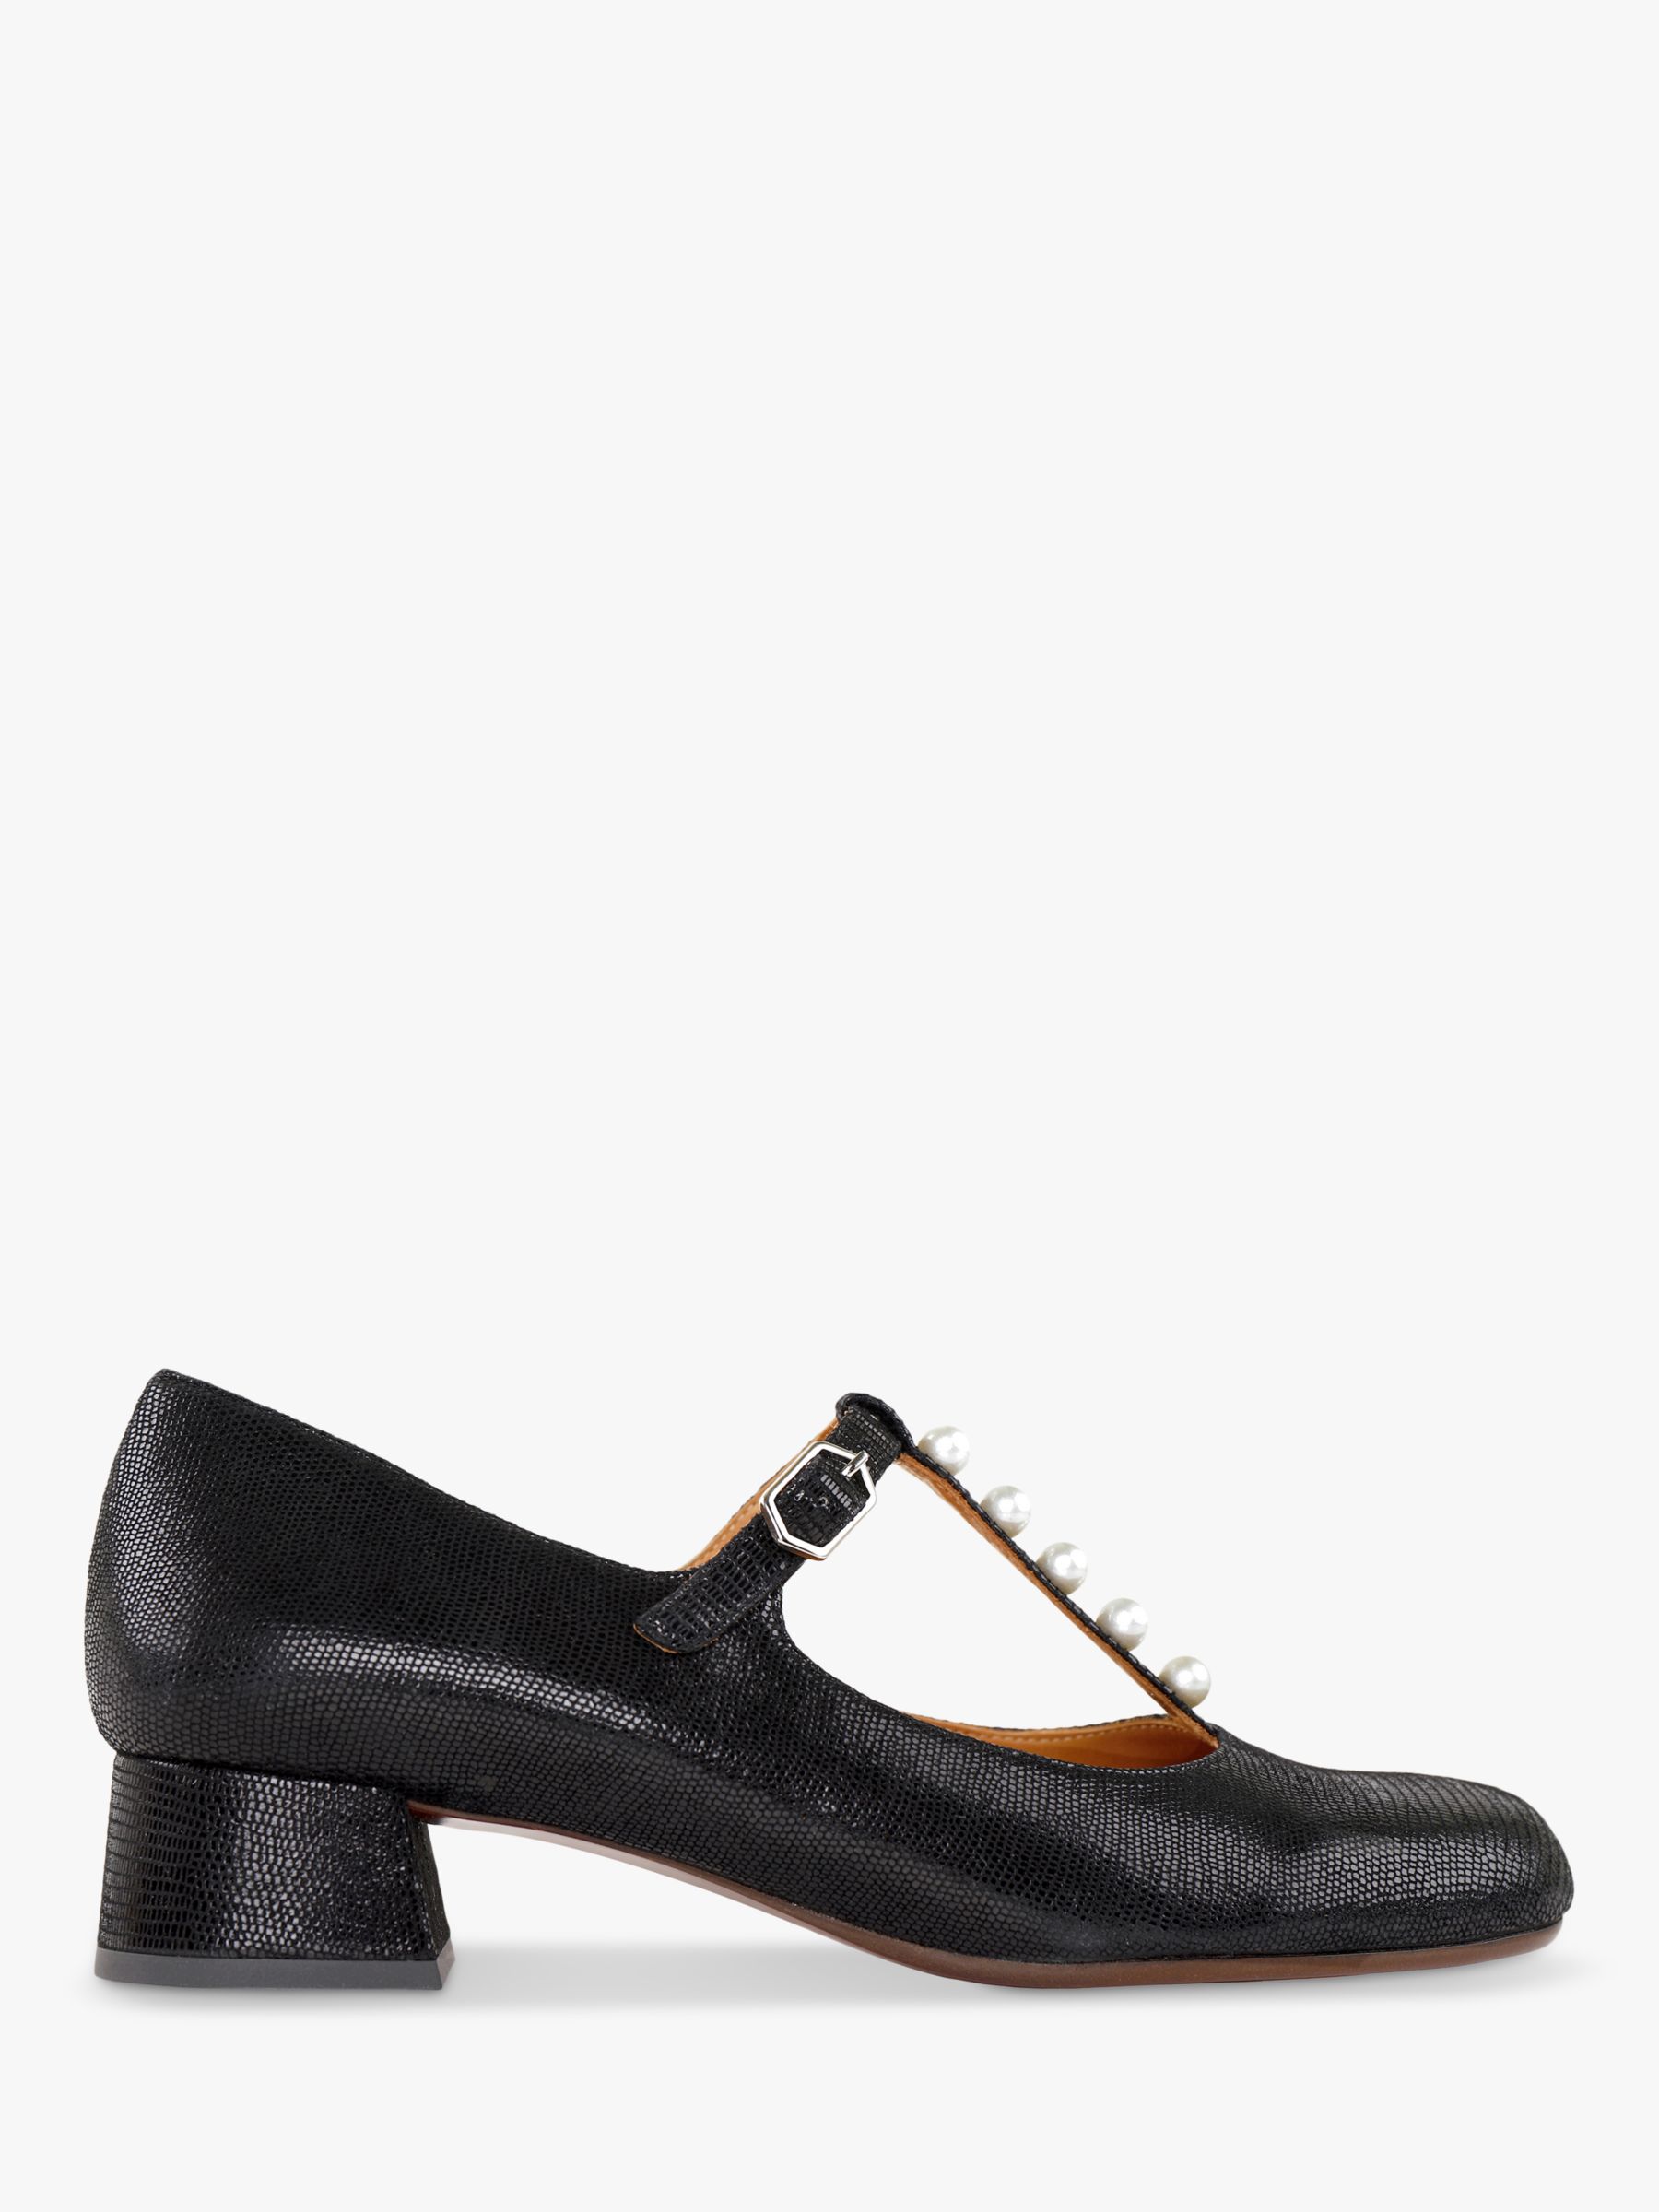 Chie Mihara Reyta Leather Mary Jane Shoes, Black/Sand